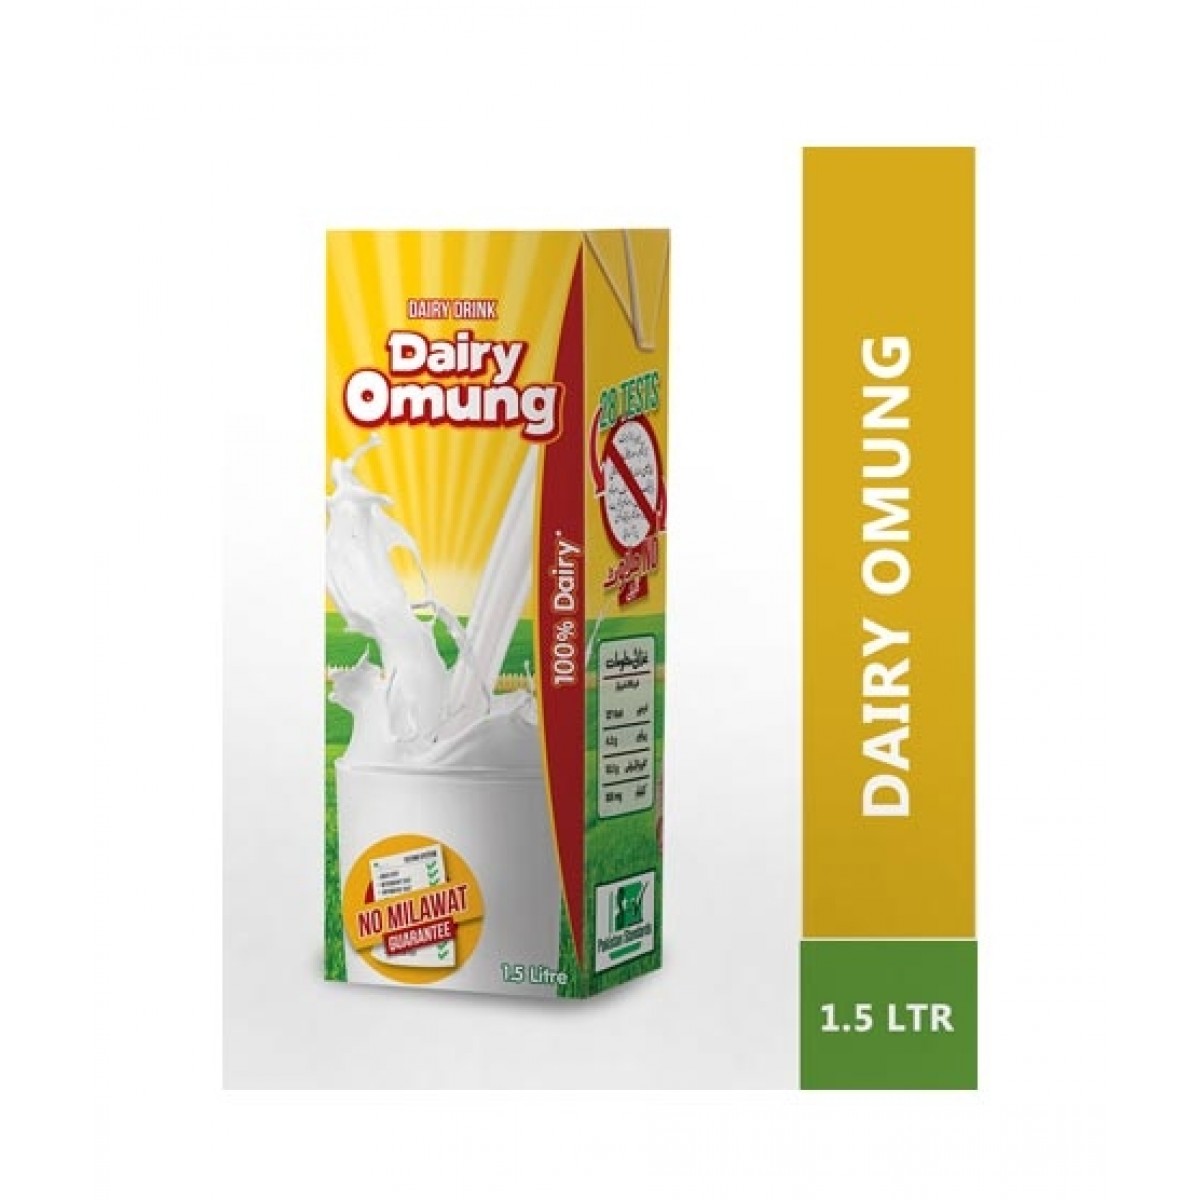 Dairy Omung Pack 1.5 ltr